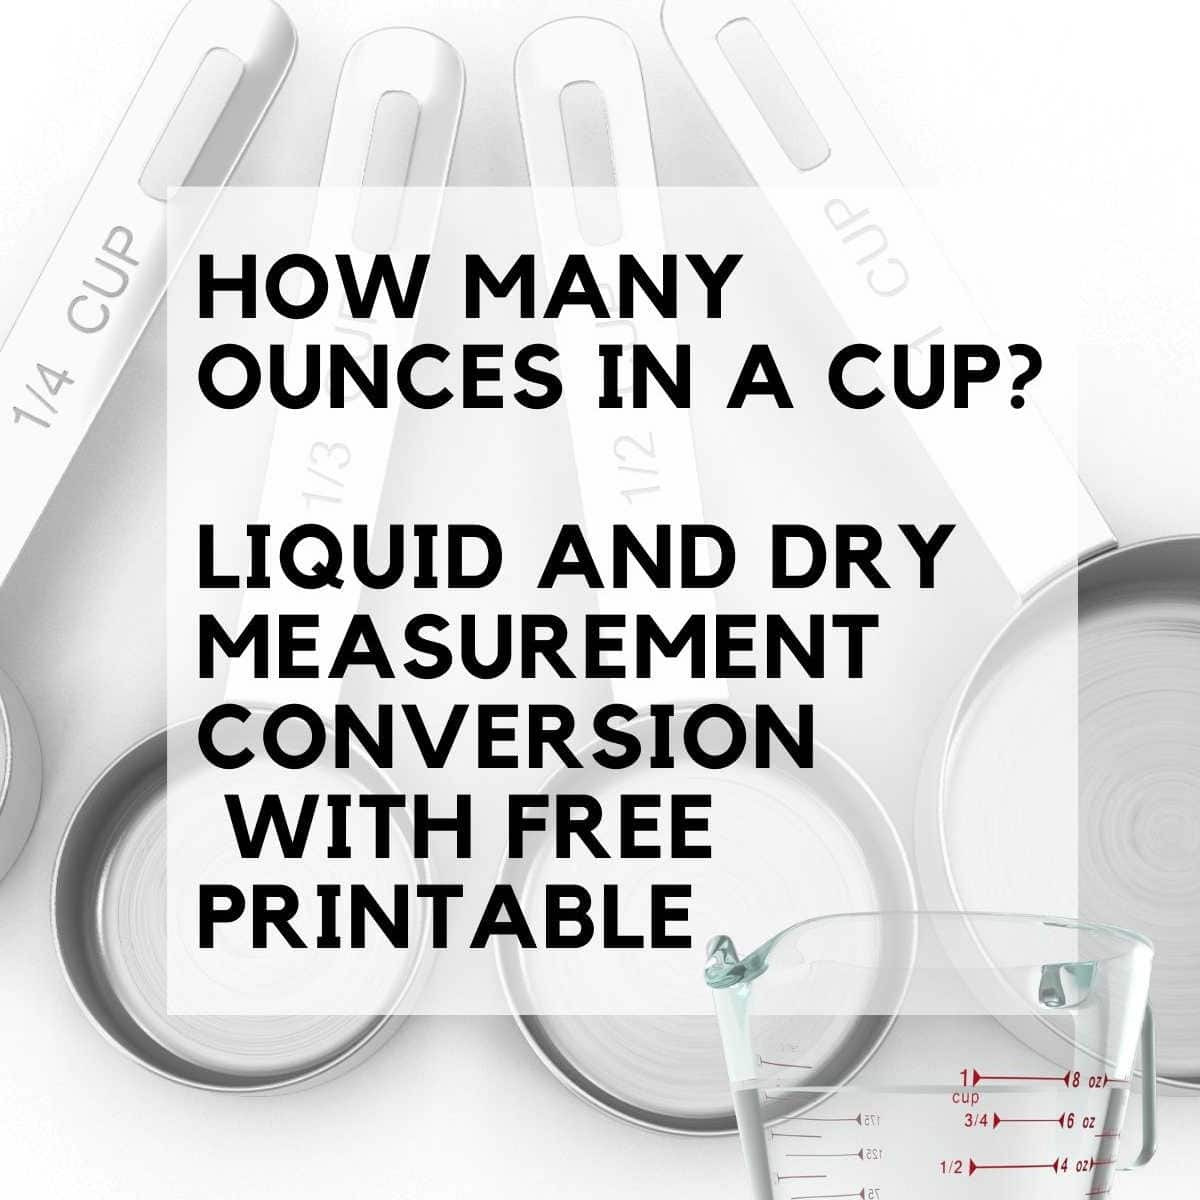 oz to Cups Converter - How to Convert oz to Cups?